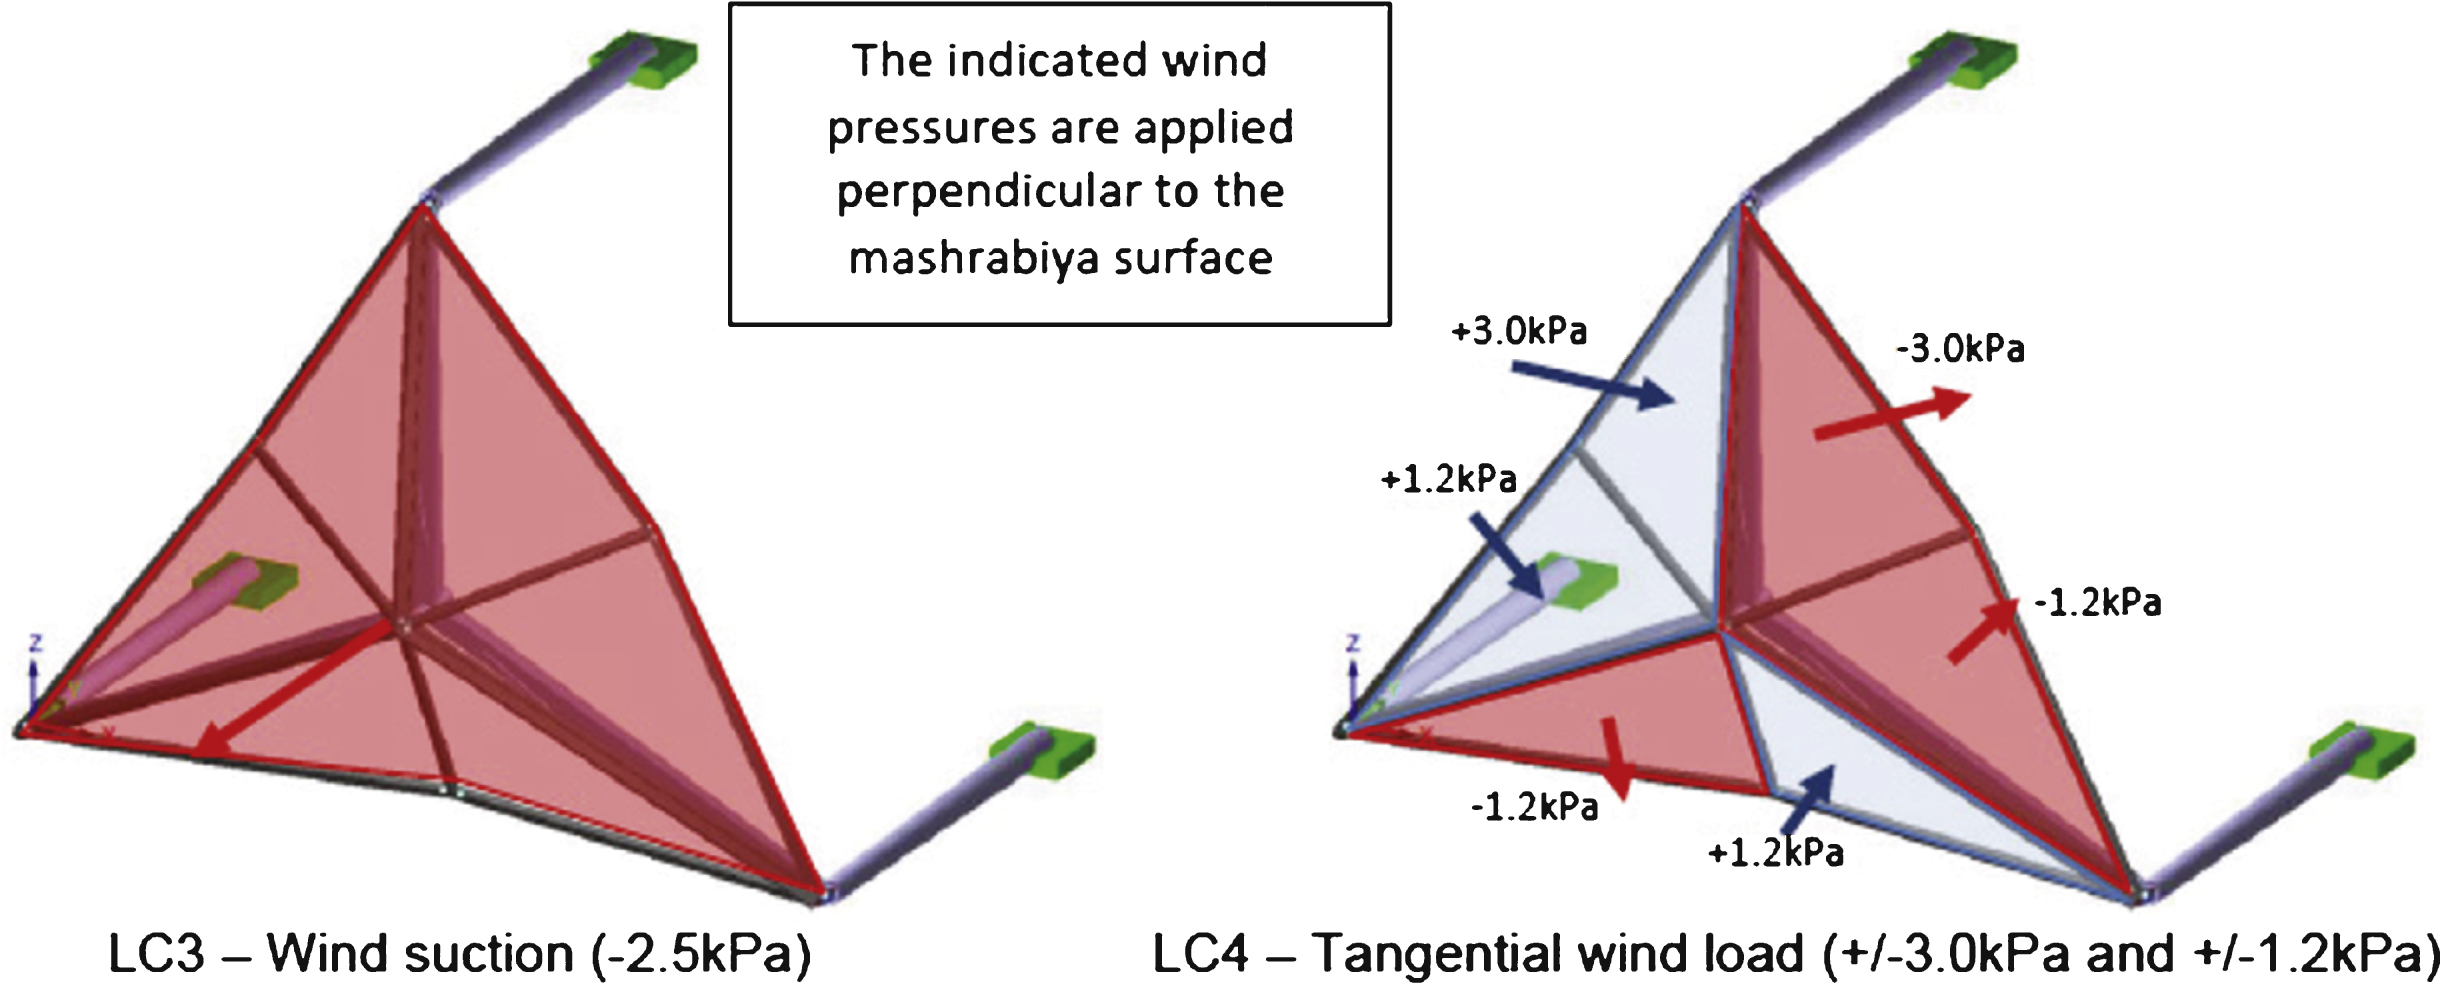 These figures illustrate the results of wind tunnel tests conducted on full-scale dynamic prototypes. The results reveal relatively low wind-loads due to the fluid geometry of the building and efficient form of the mashrabiya.